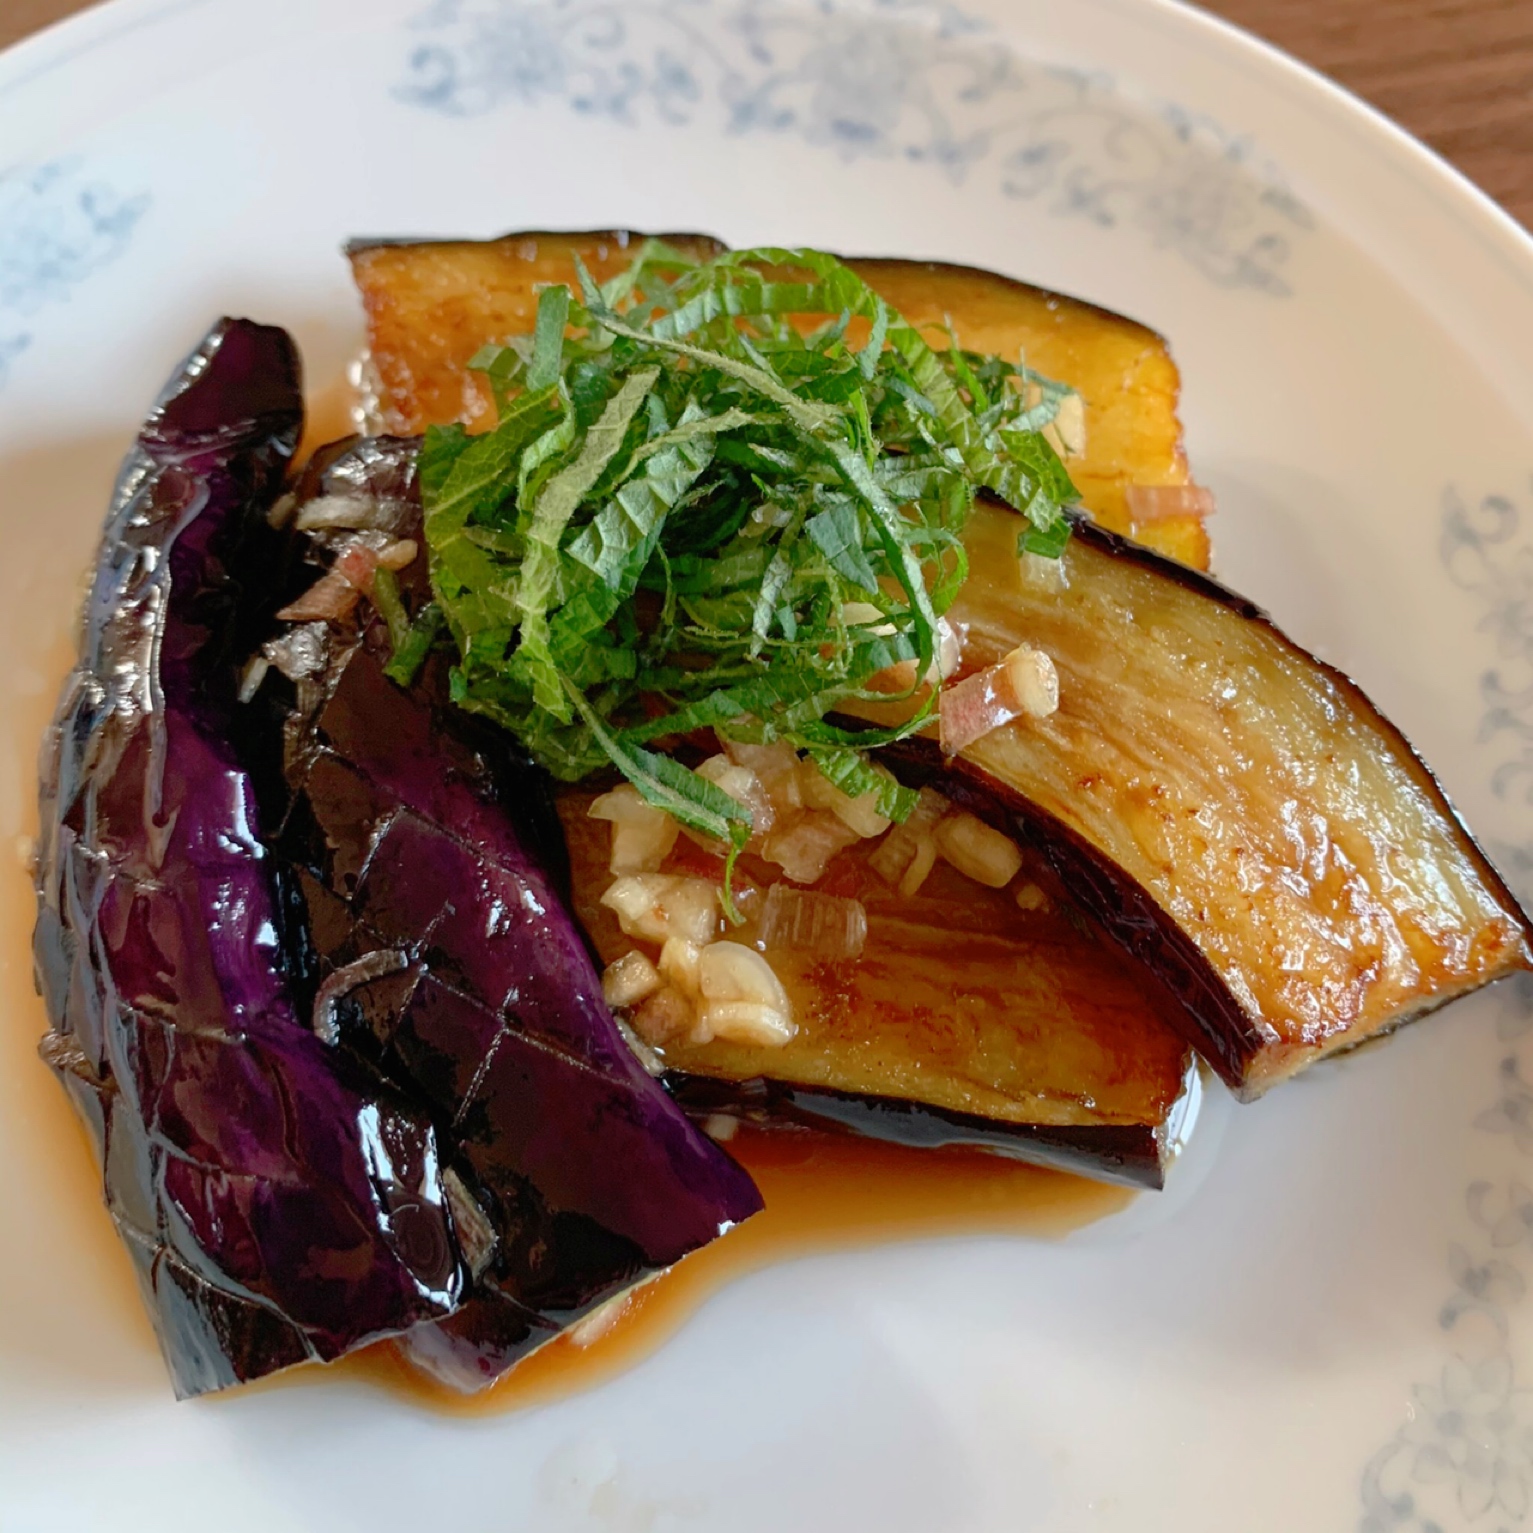 This dish is made by deep-frying eggplant and then marinating it in soy sauce.